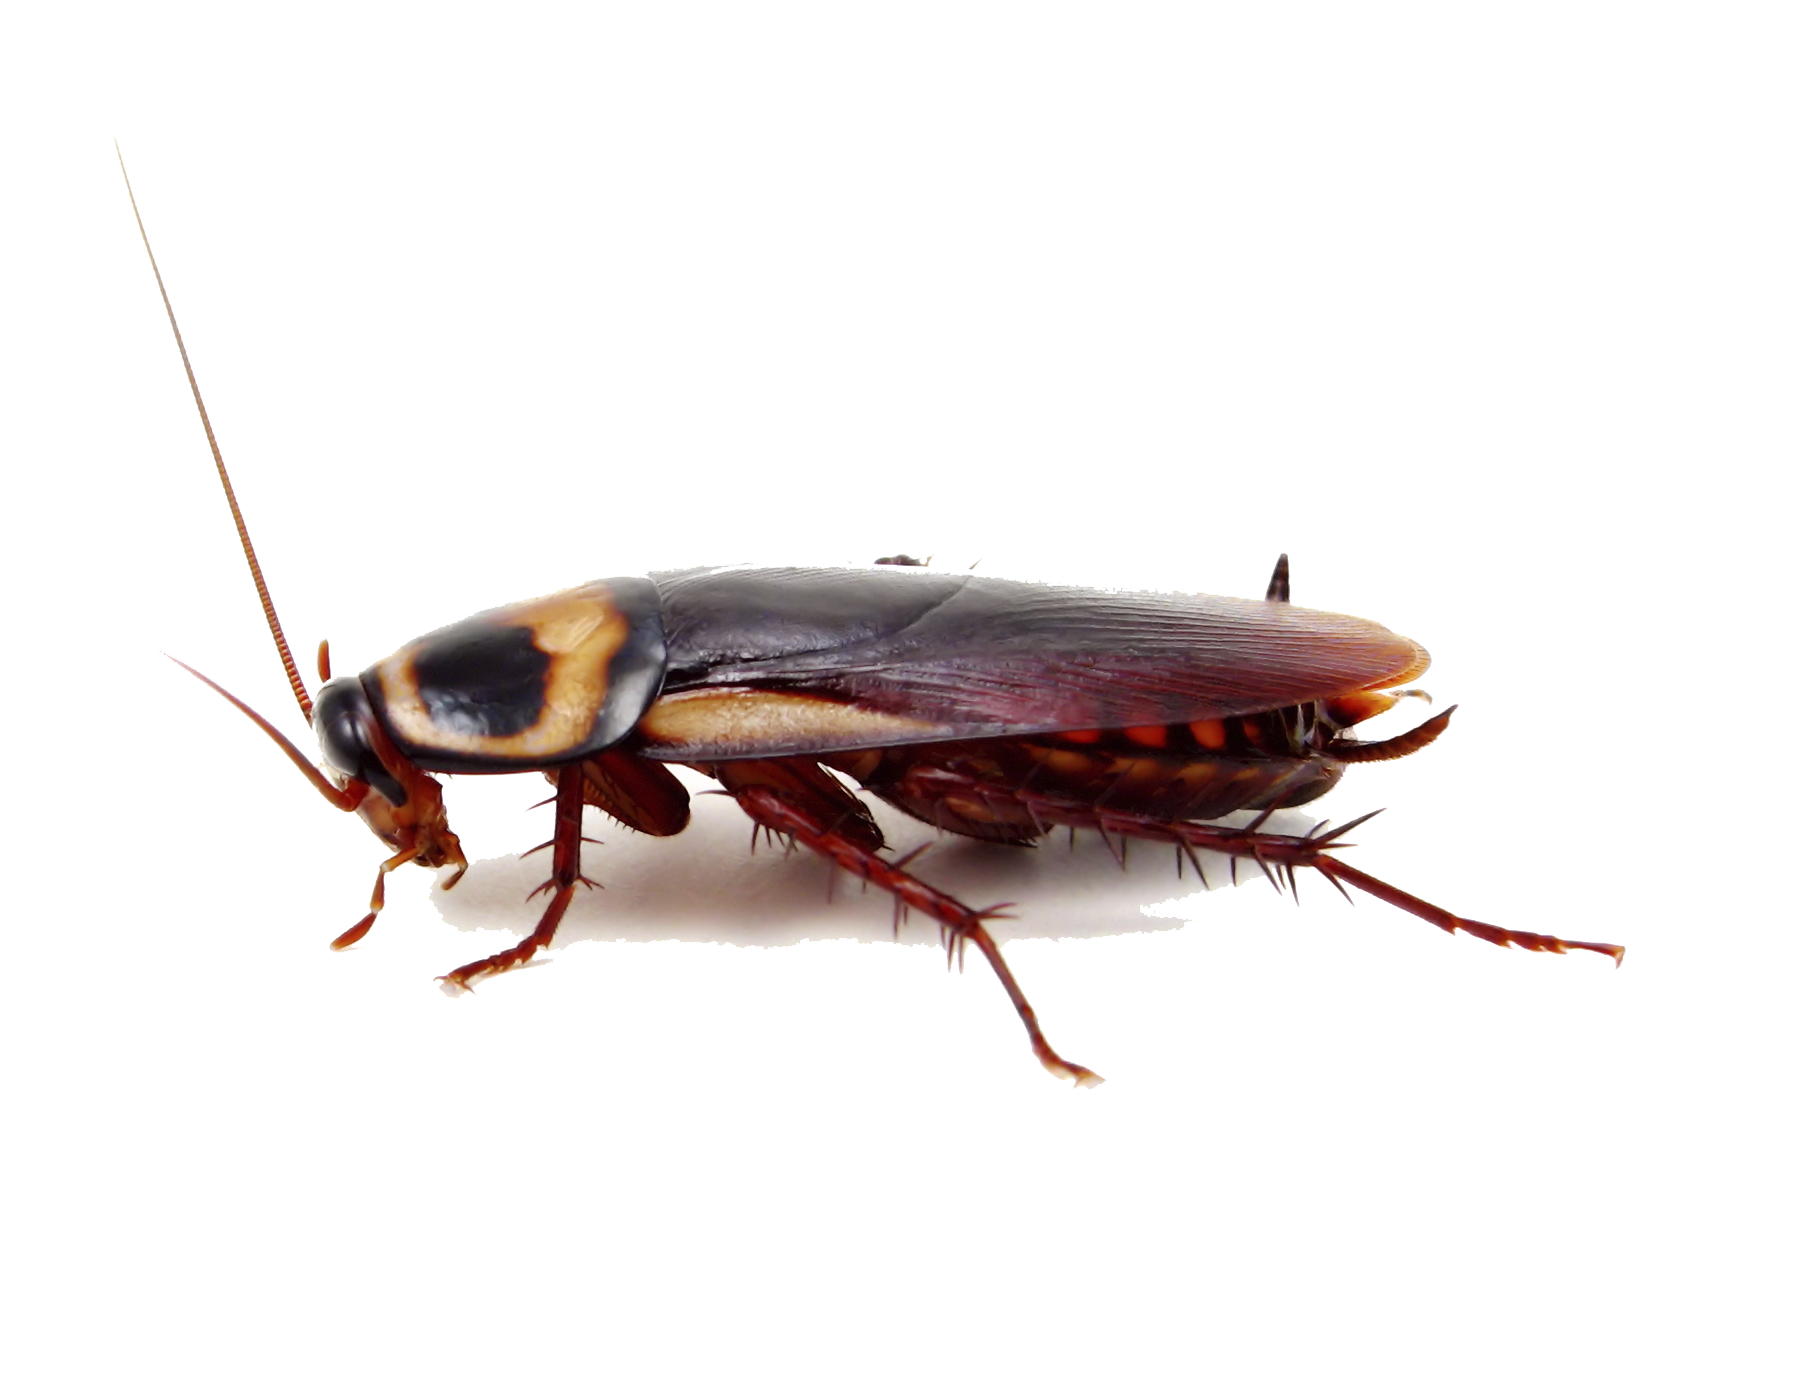 Cockroach Png Image - Cockroach, Transparent background PNG HD thumbnail